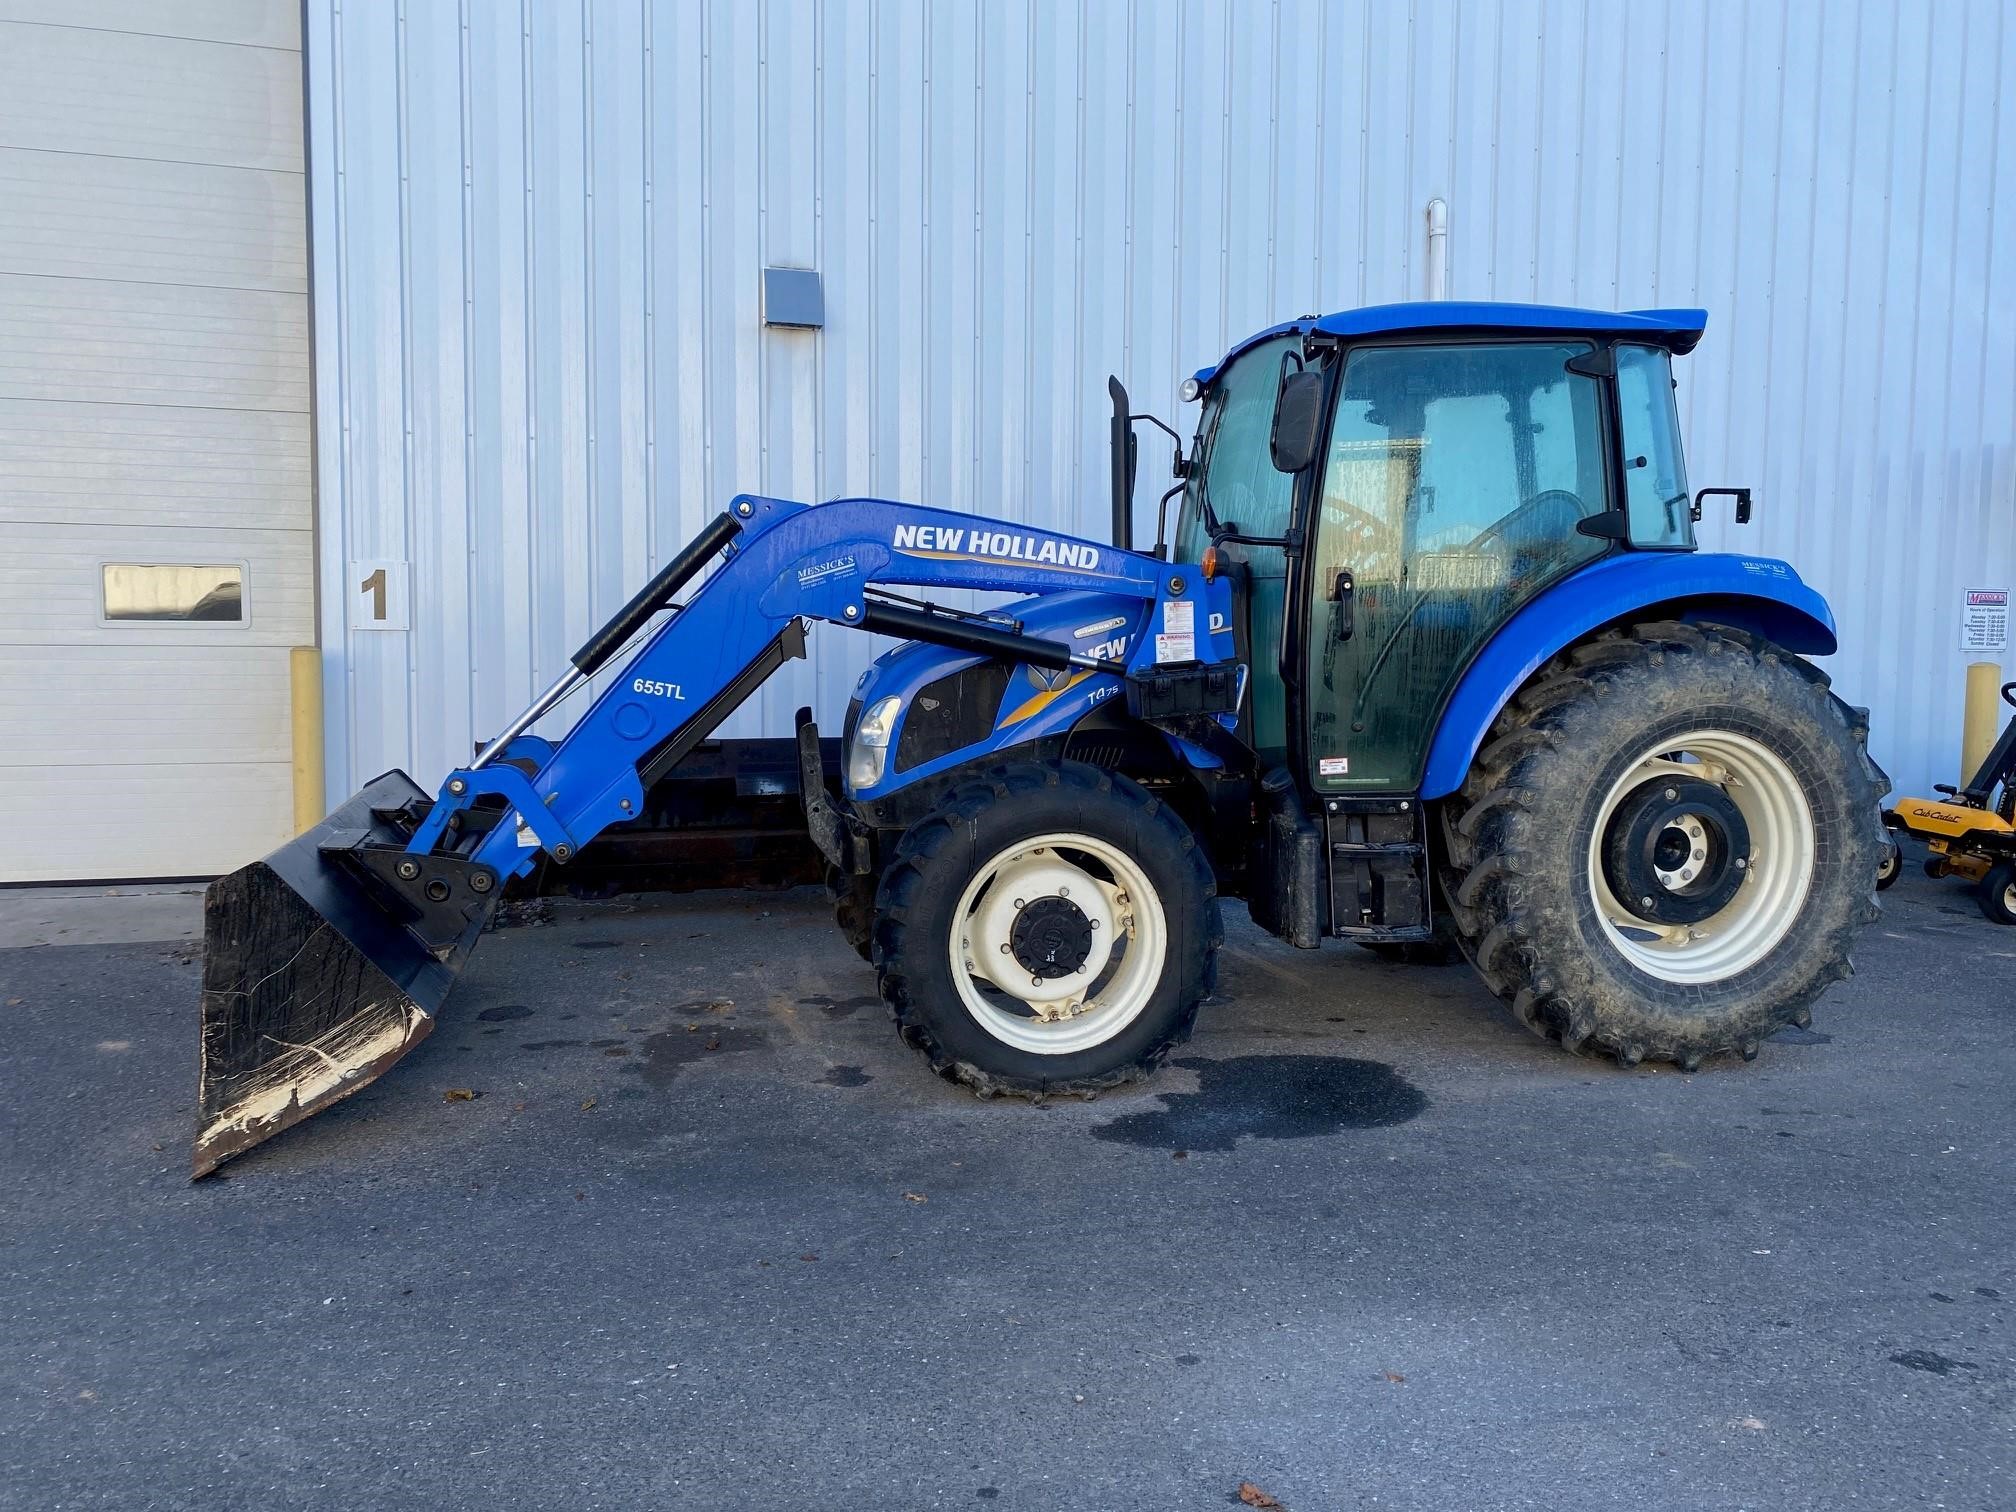 12 New Holland T4 75 For Sale From Messick S 558 In Elizabethtown Pa Ceg